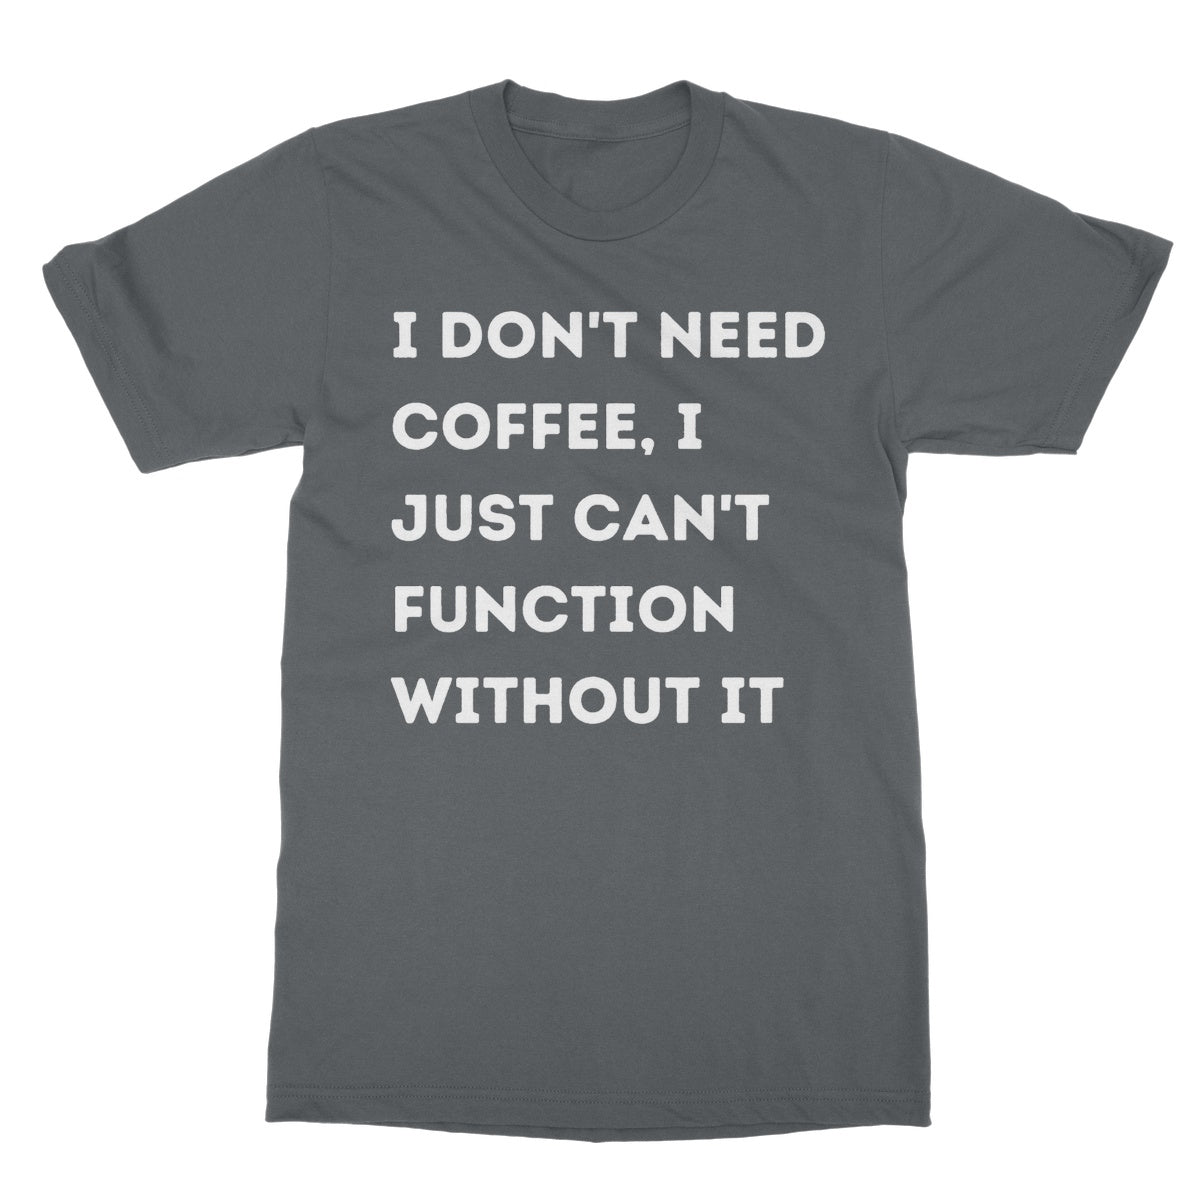 I can't function without coffee t shirt grey